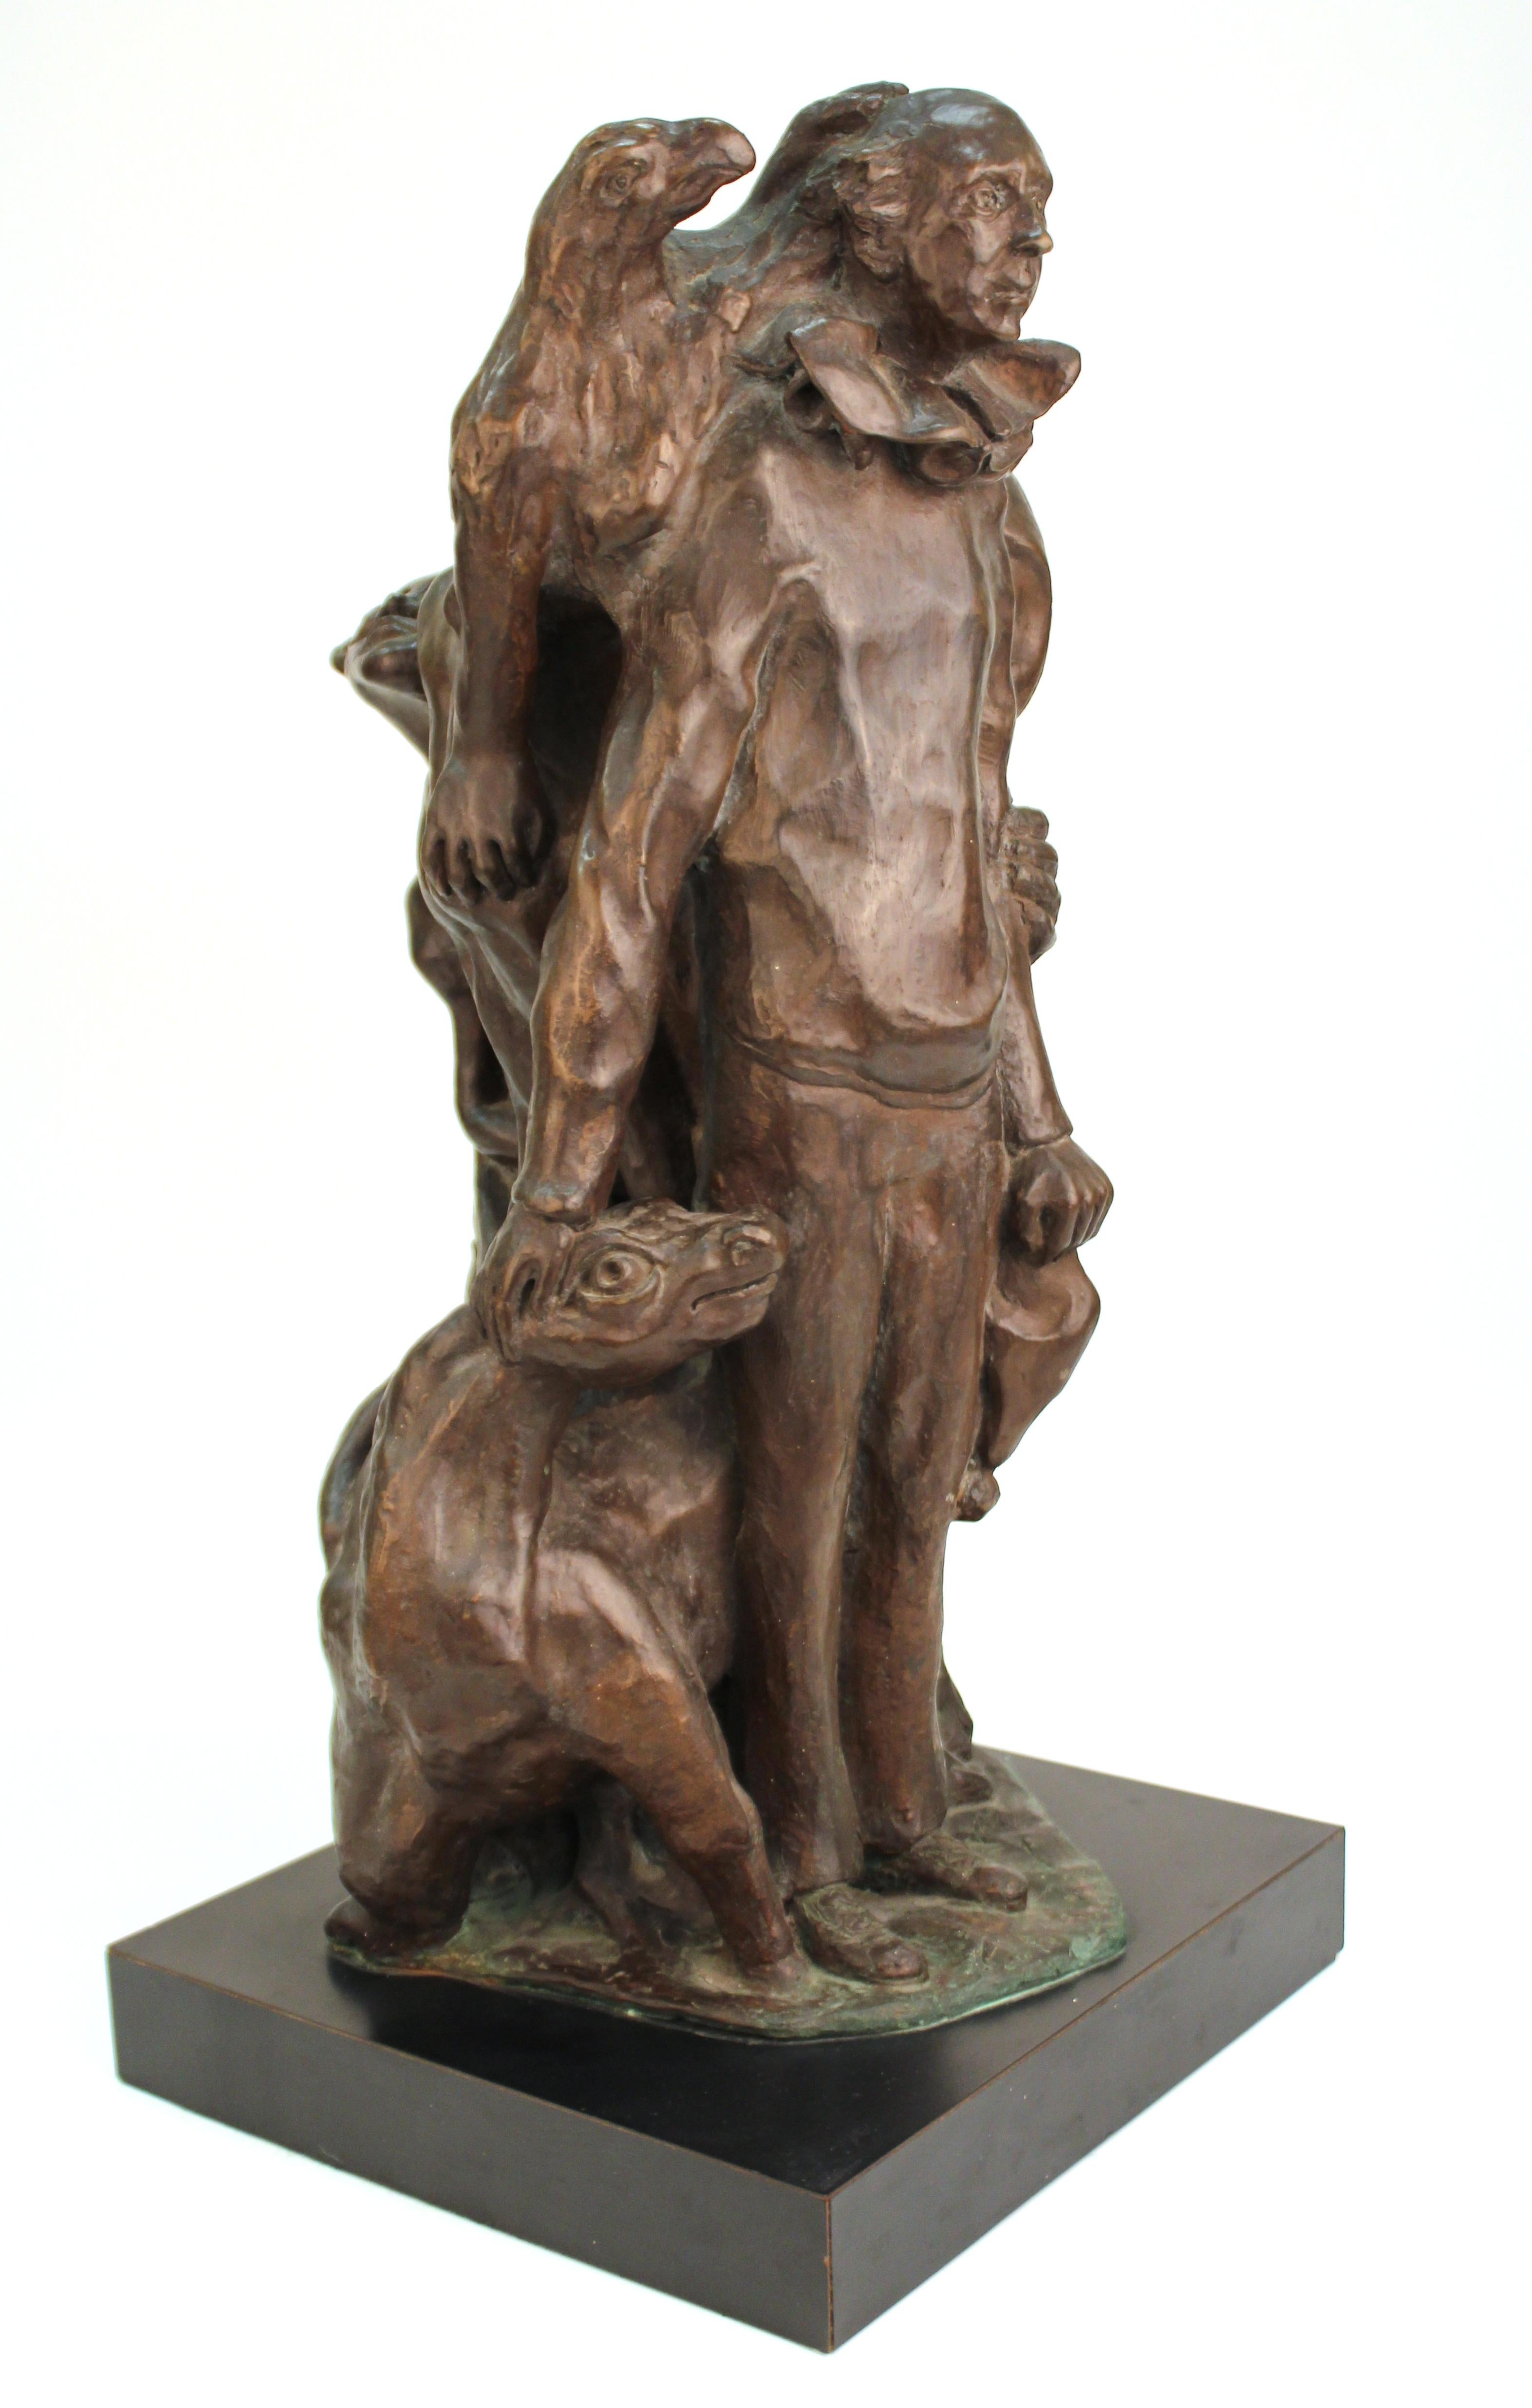 Mid-Century Modern sculpted group of a standing clown surrounded by animals and mystical creatures. The piece is made in bronzed terracotta and sits atop a black base. The piece is marked illegibly with a monogram on the base and on the top of the